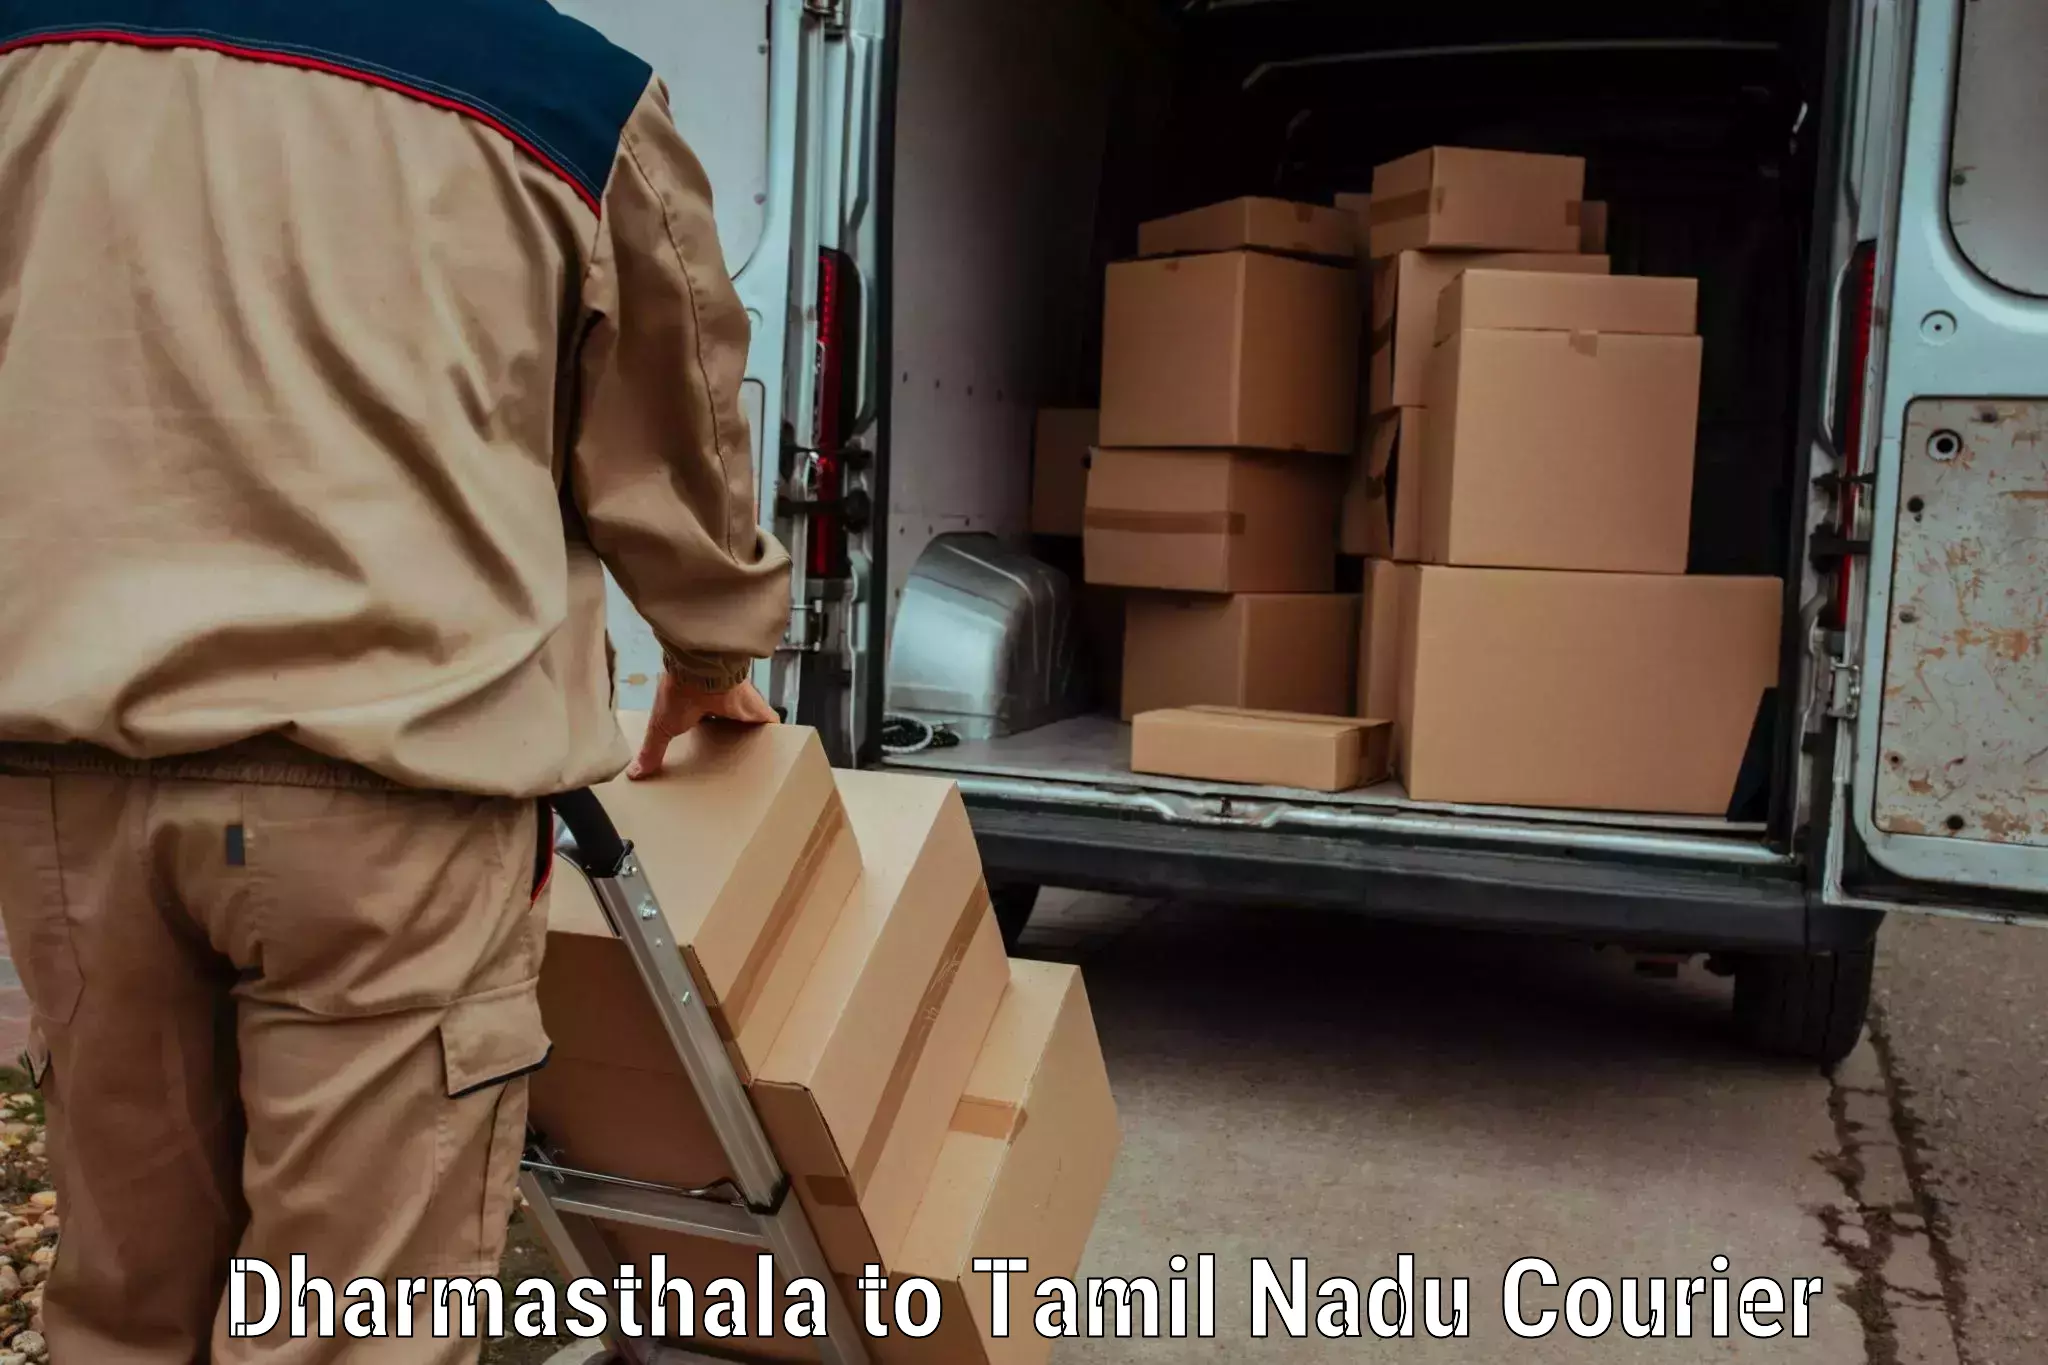 High-speed delivery in Dharmasthala to Thiruvadanai